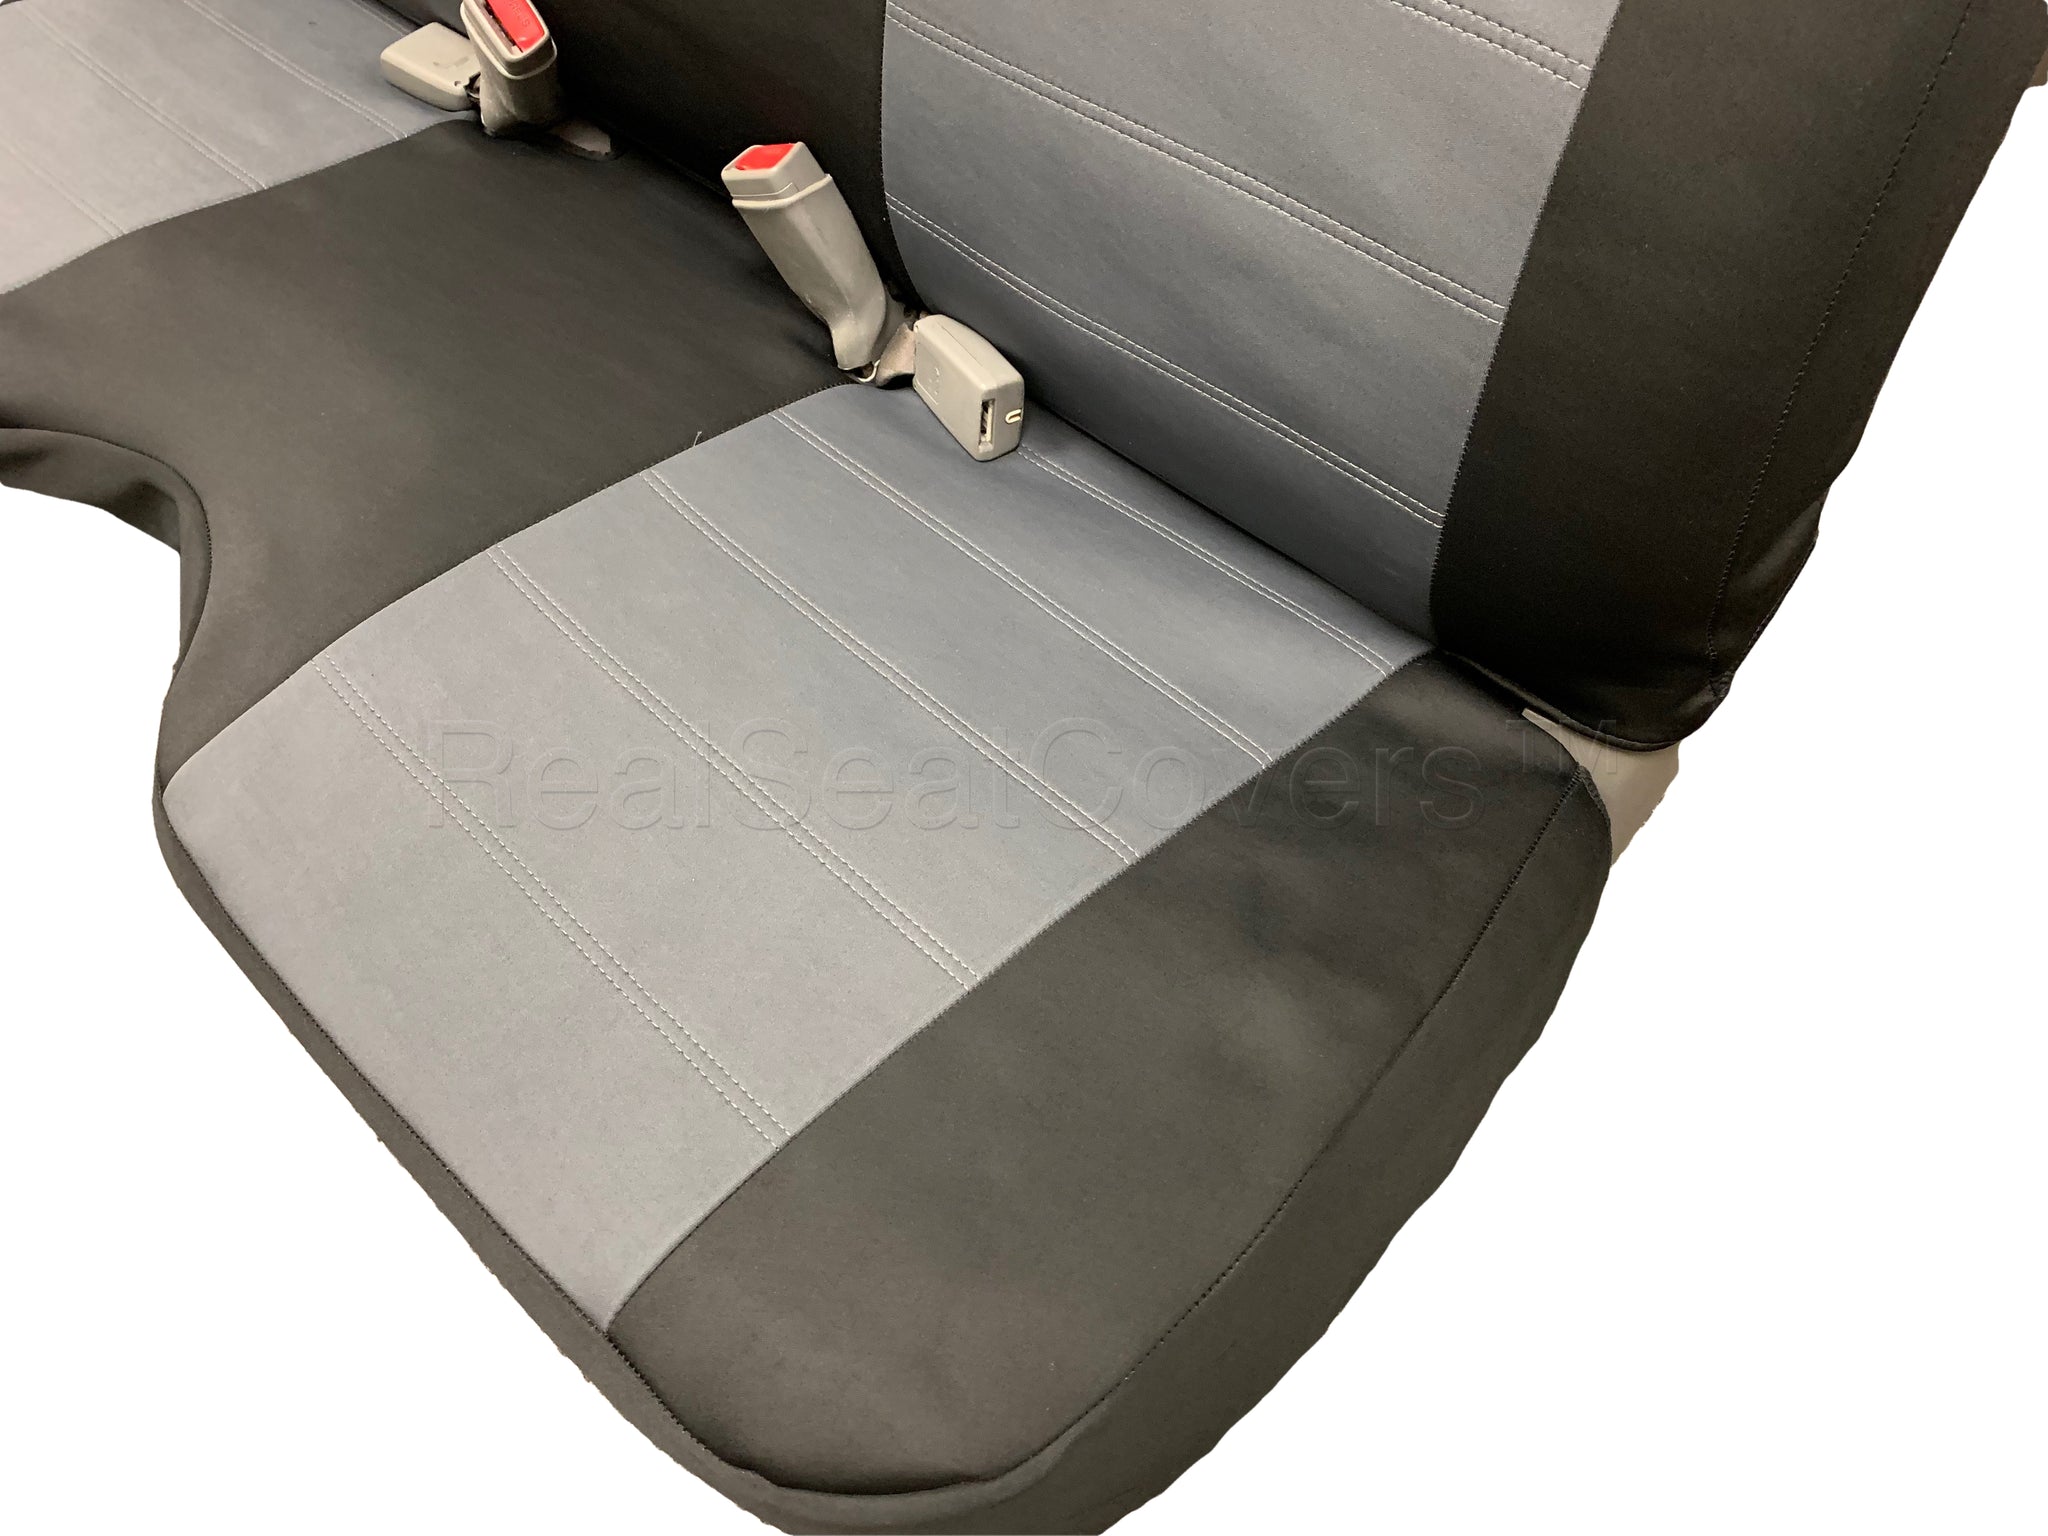 Waterproof Seat Cover for Toyota Tacoma 100% Exact Fit Bench Neoprene